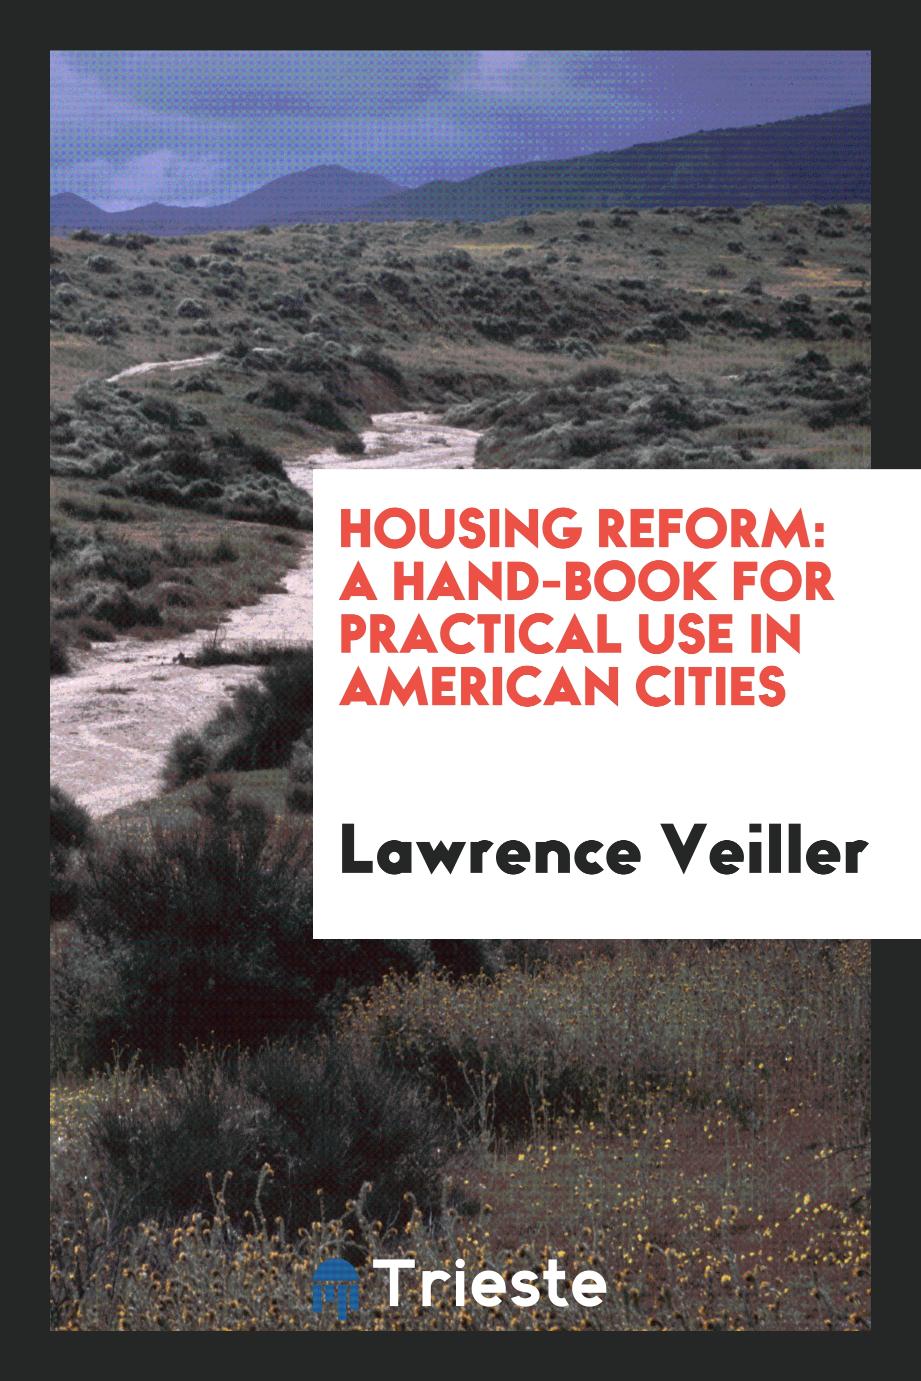 Housing Reform: A Hand-Book for Practical Use in American Cities